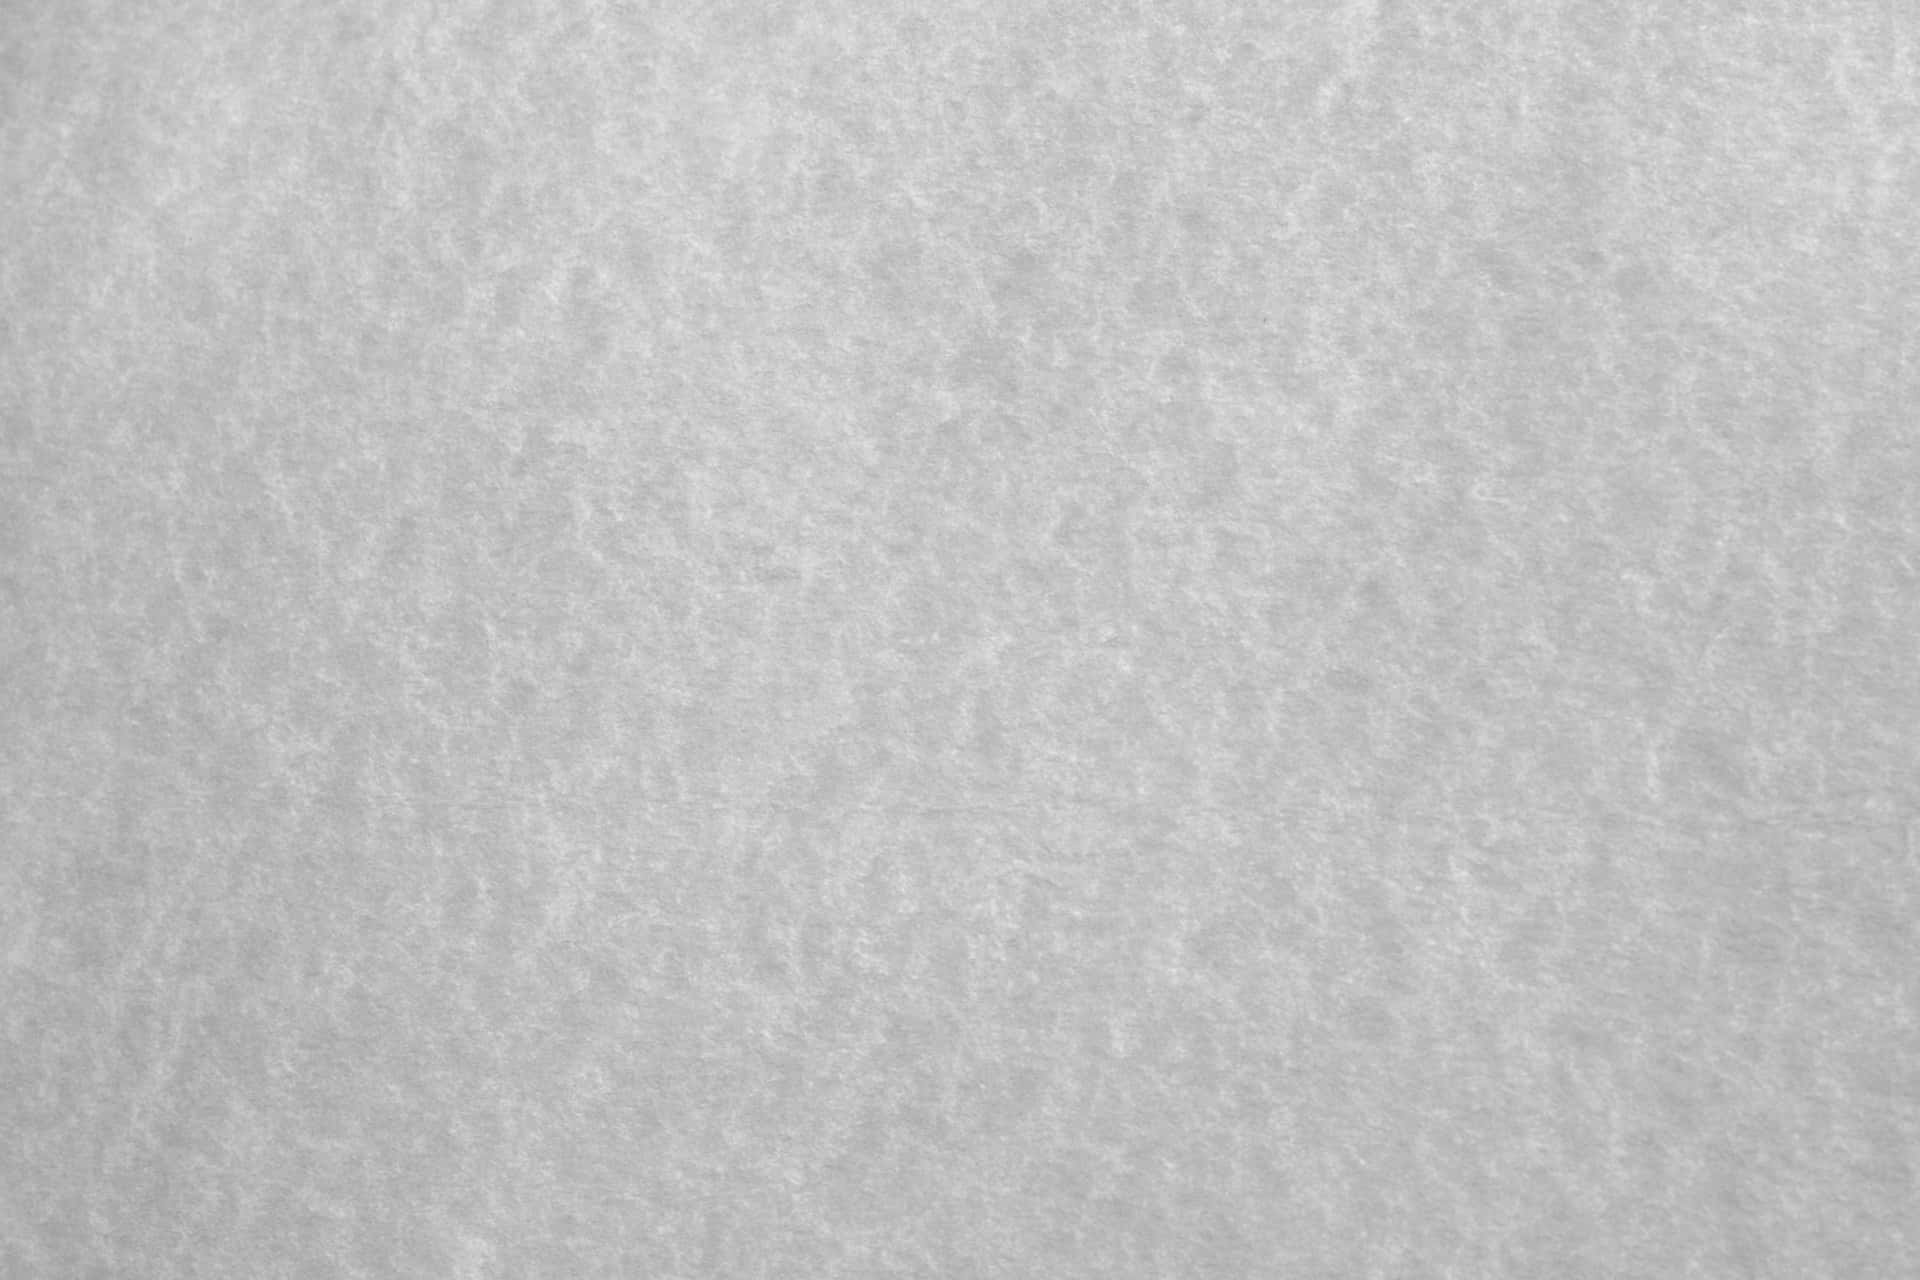 Download A White Background With A White Cloth | Wallpapers.com